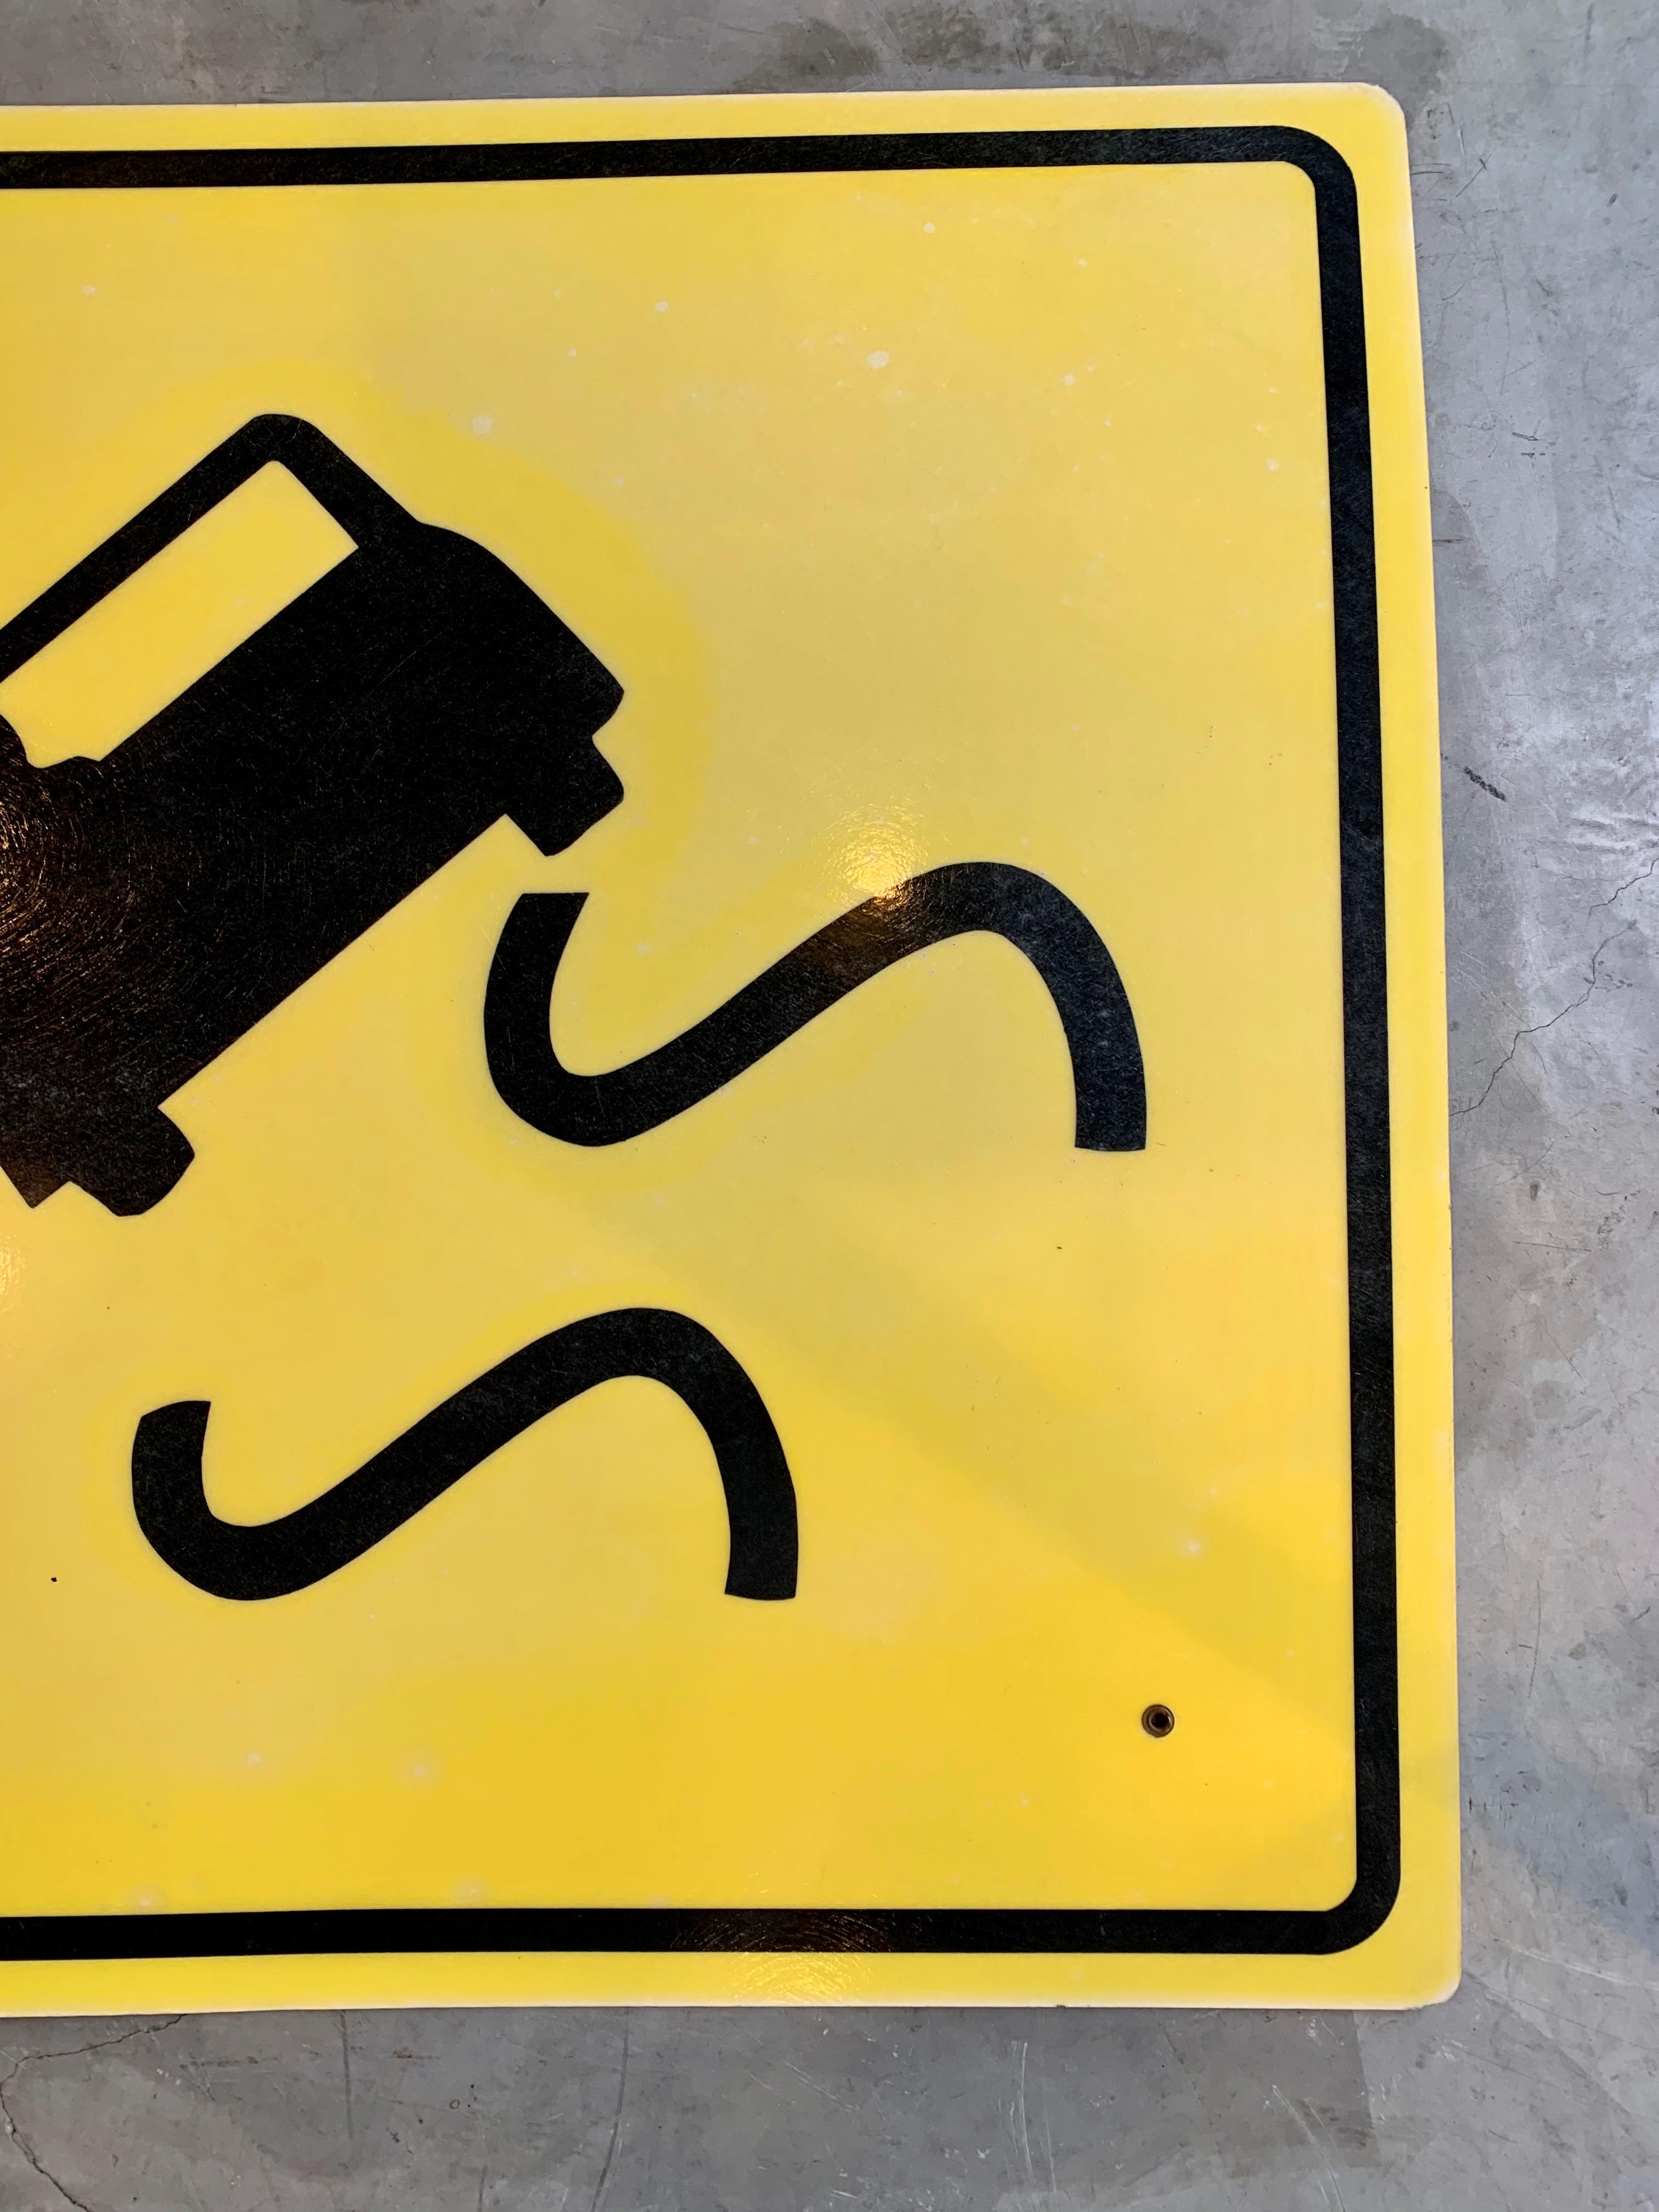 yellow sign with car and squiggly lines meaning